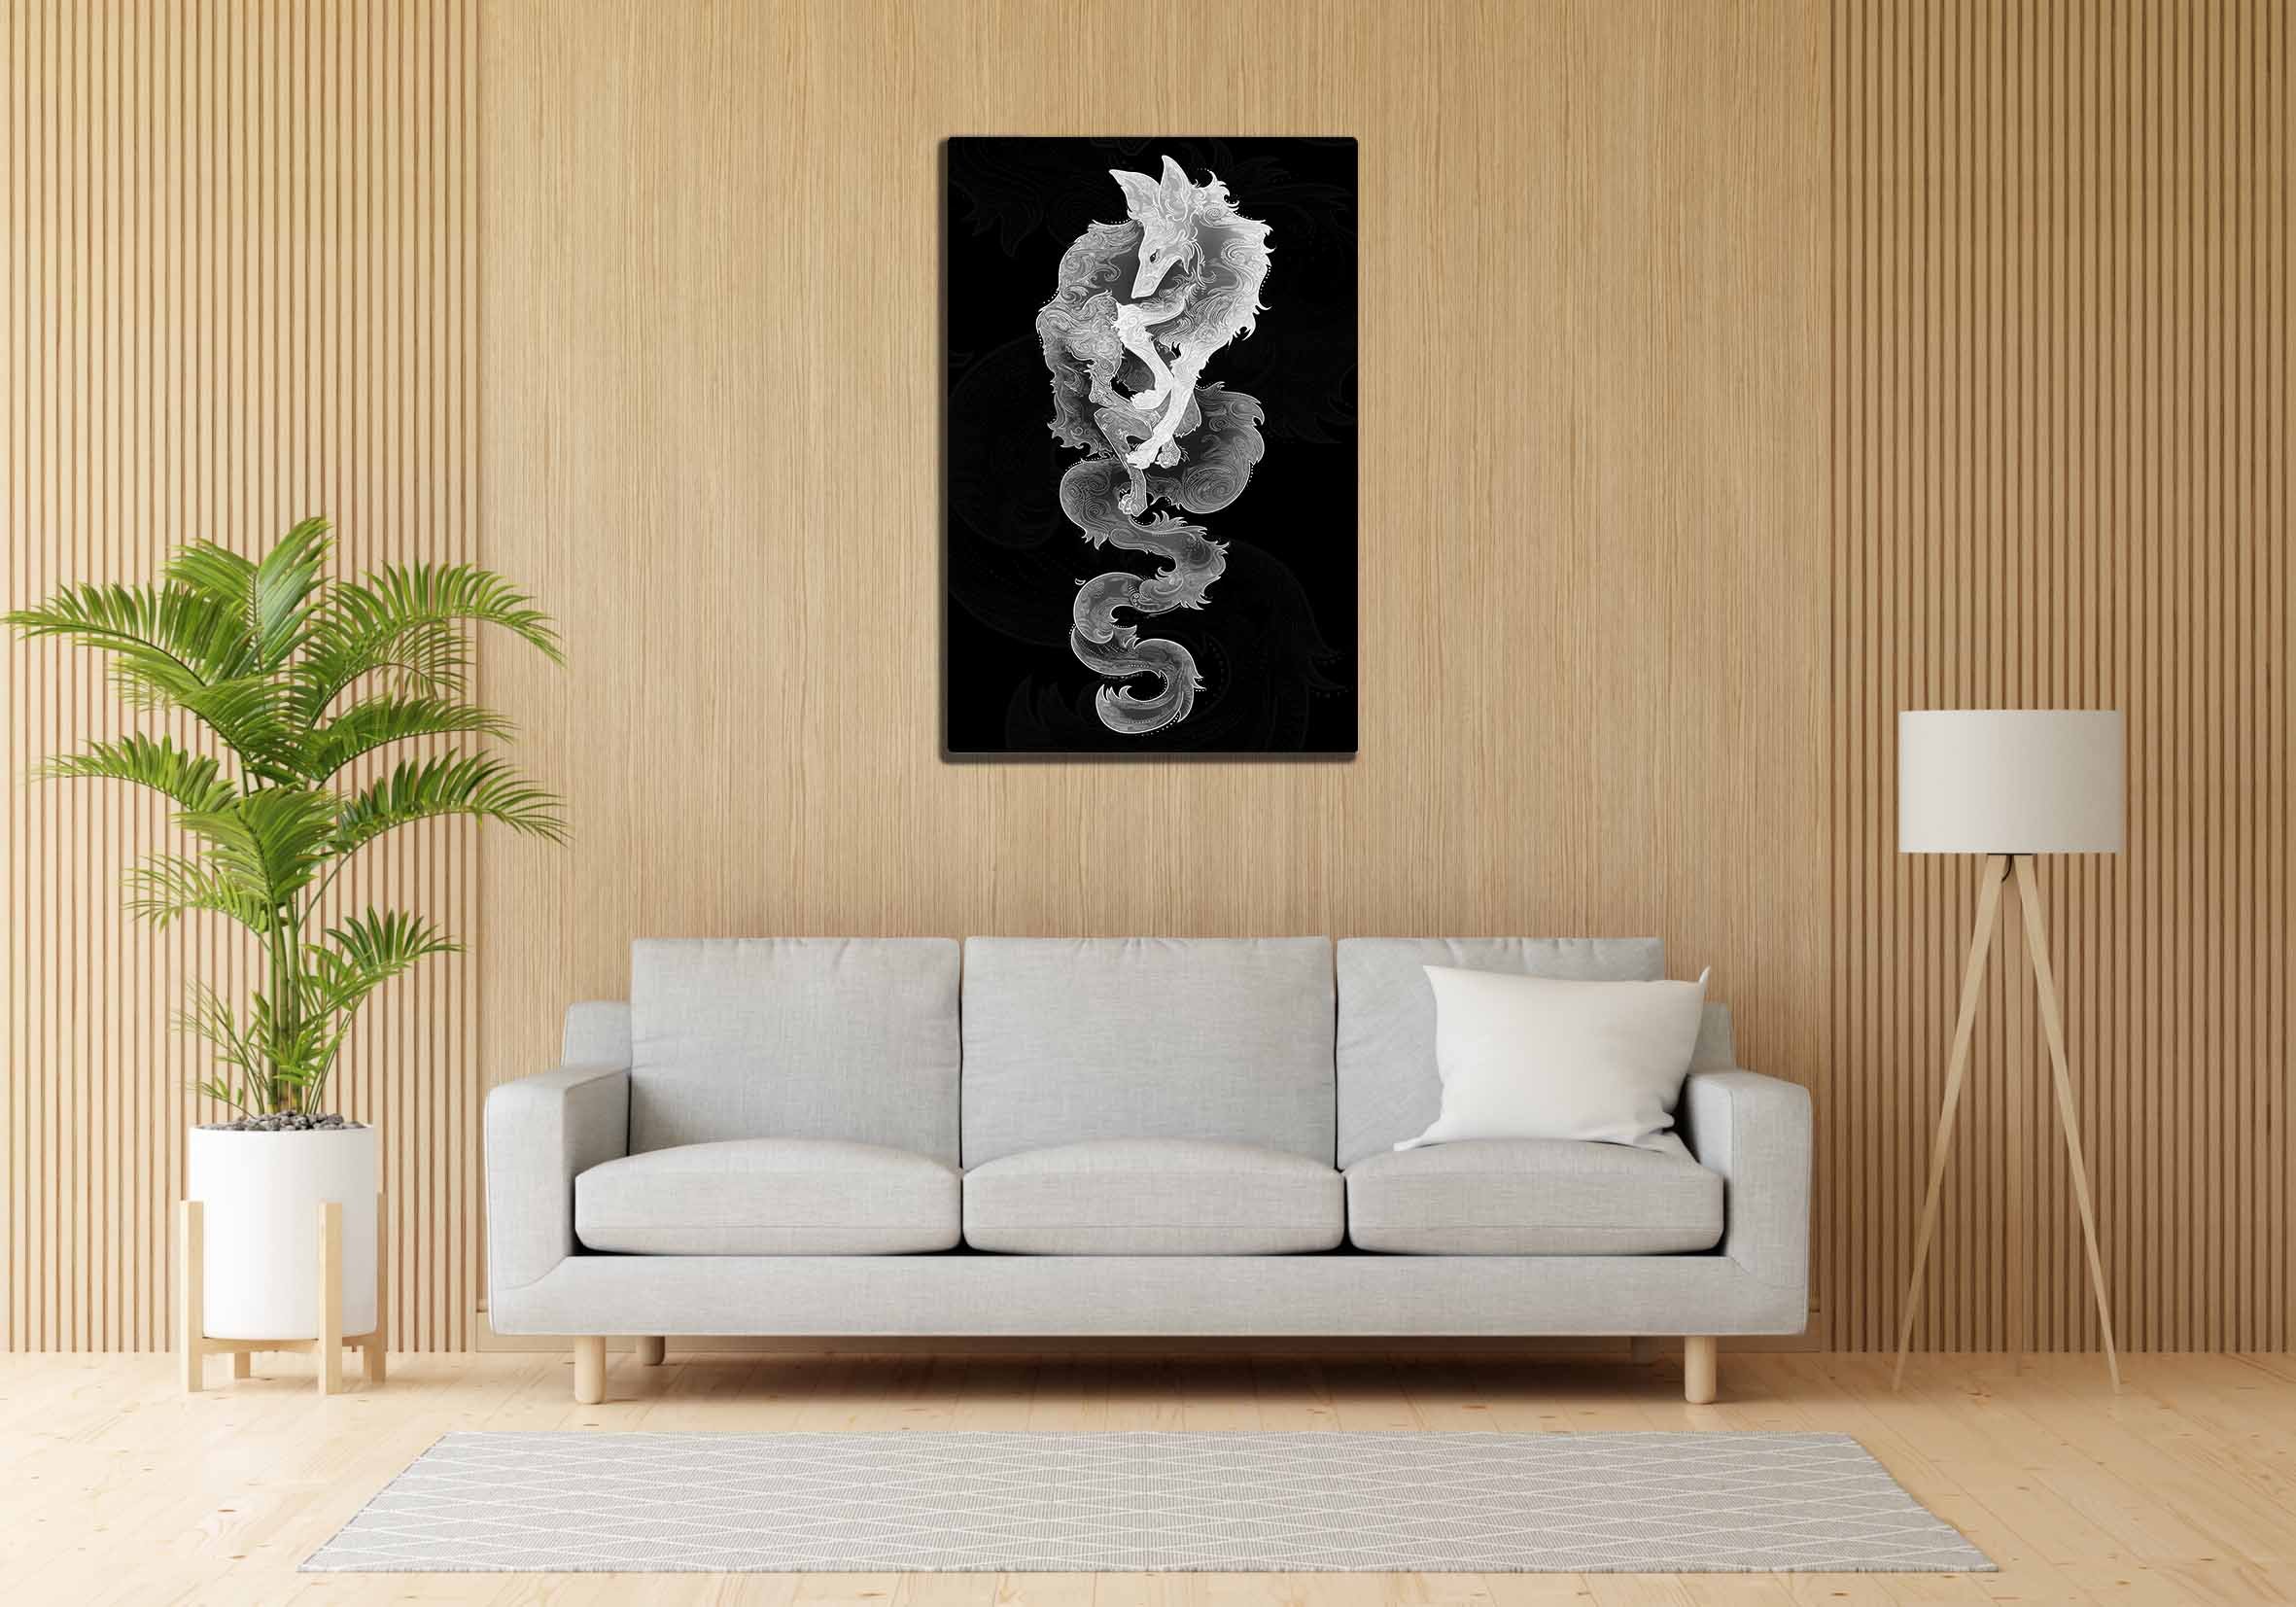 Art Wall Decor Metal Wall Art Decor for Living Room, Hanging Metal Wall  Sculpture with LED Lights, Wall Decoration Home Ornaments Wall Hanging